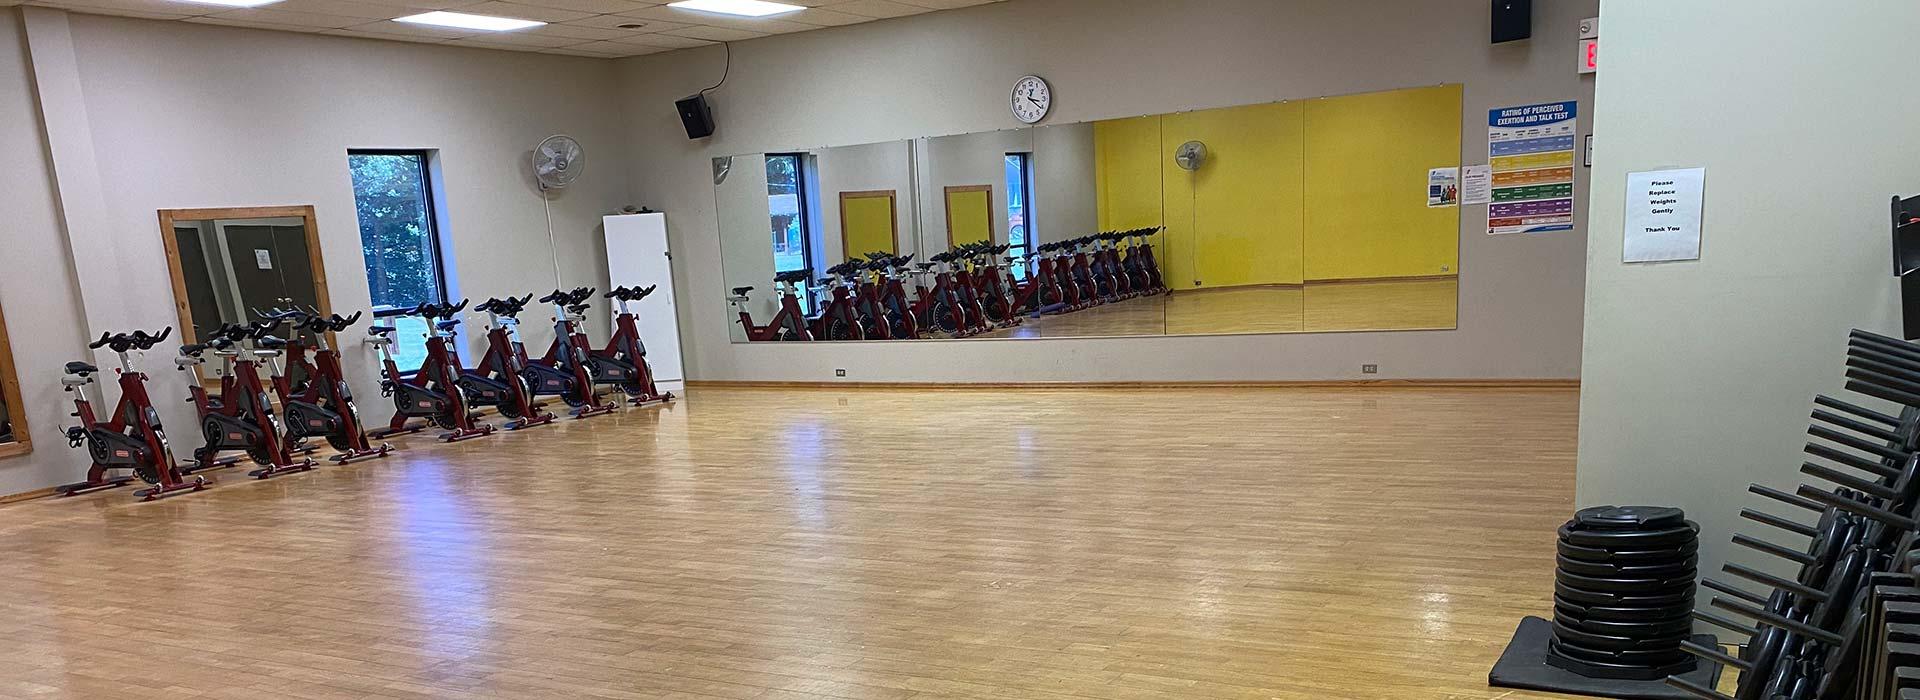 Group fitness room in the YMCA of South Boston/Halifax County